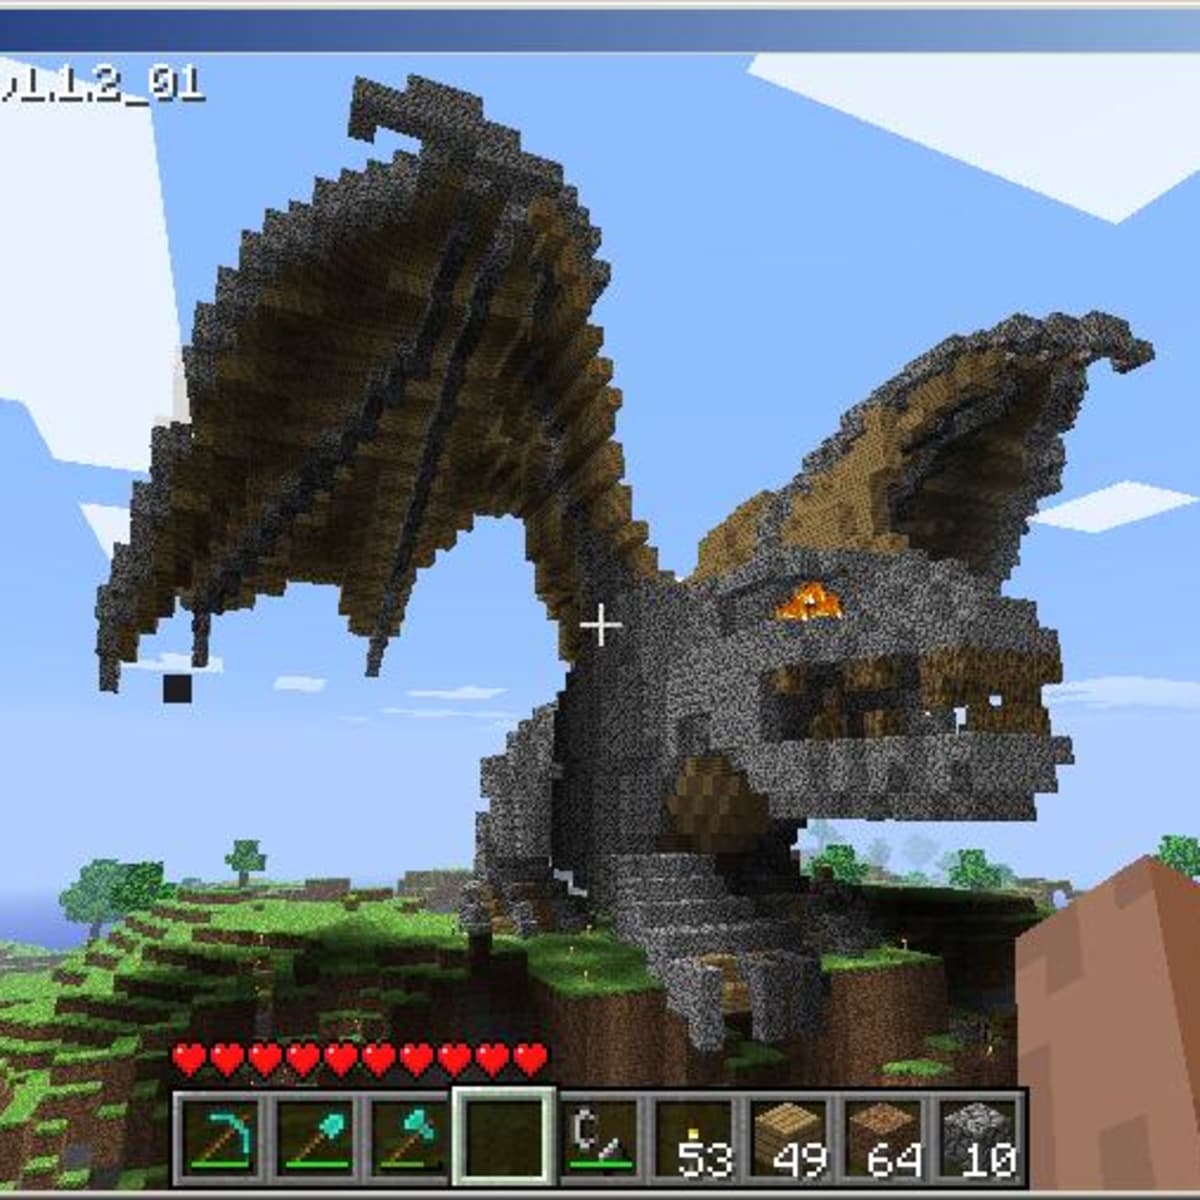 coolest thing ever built in minecraft